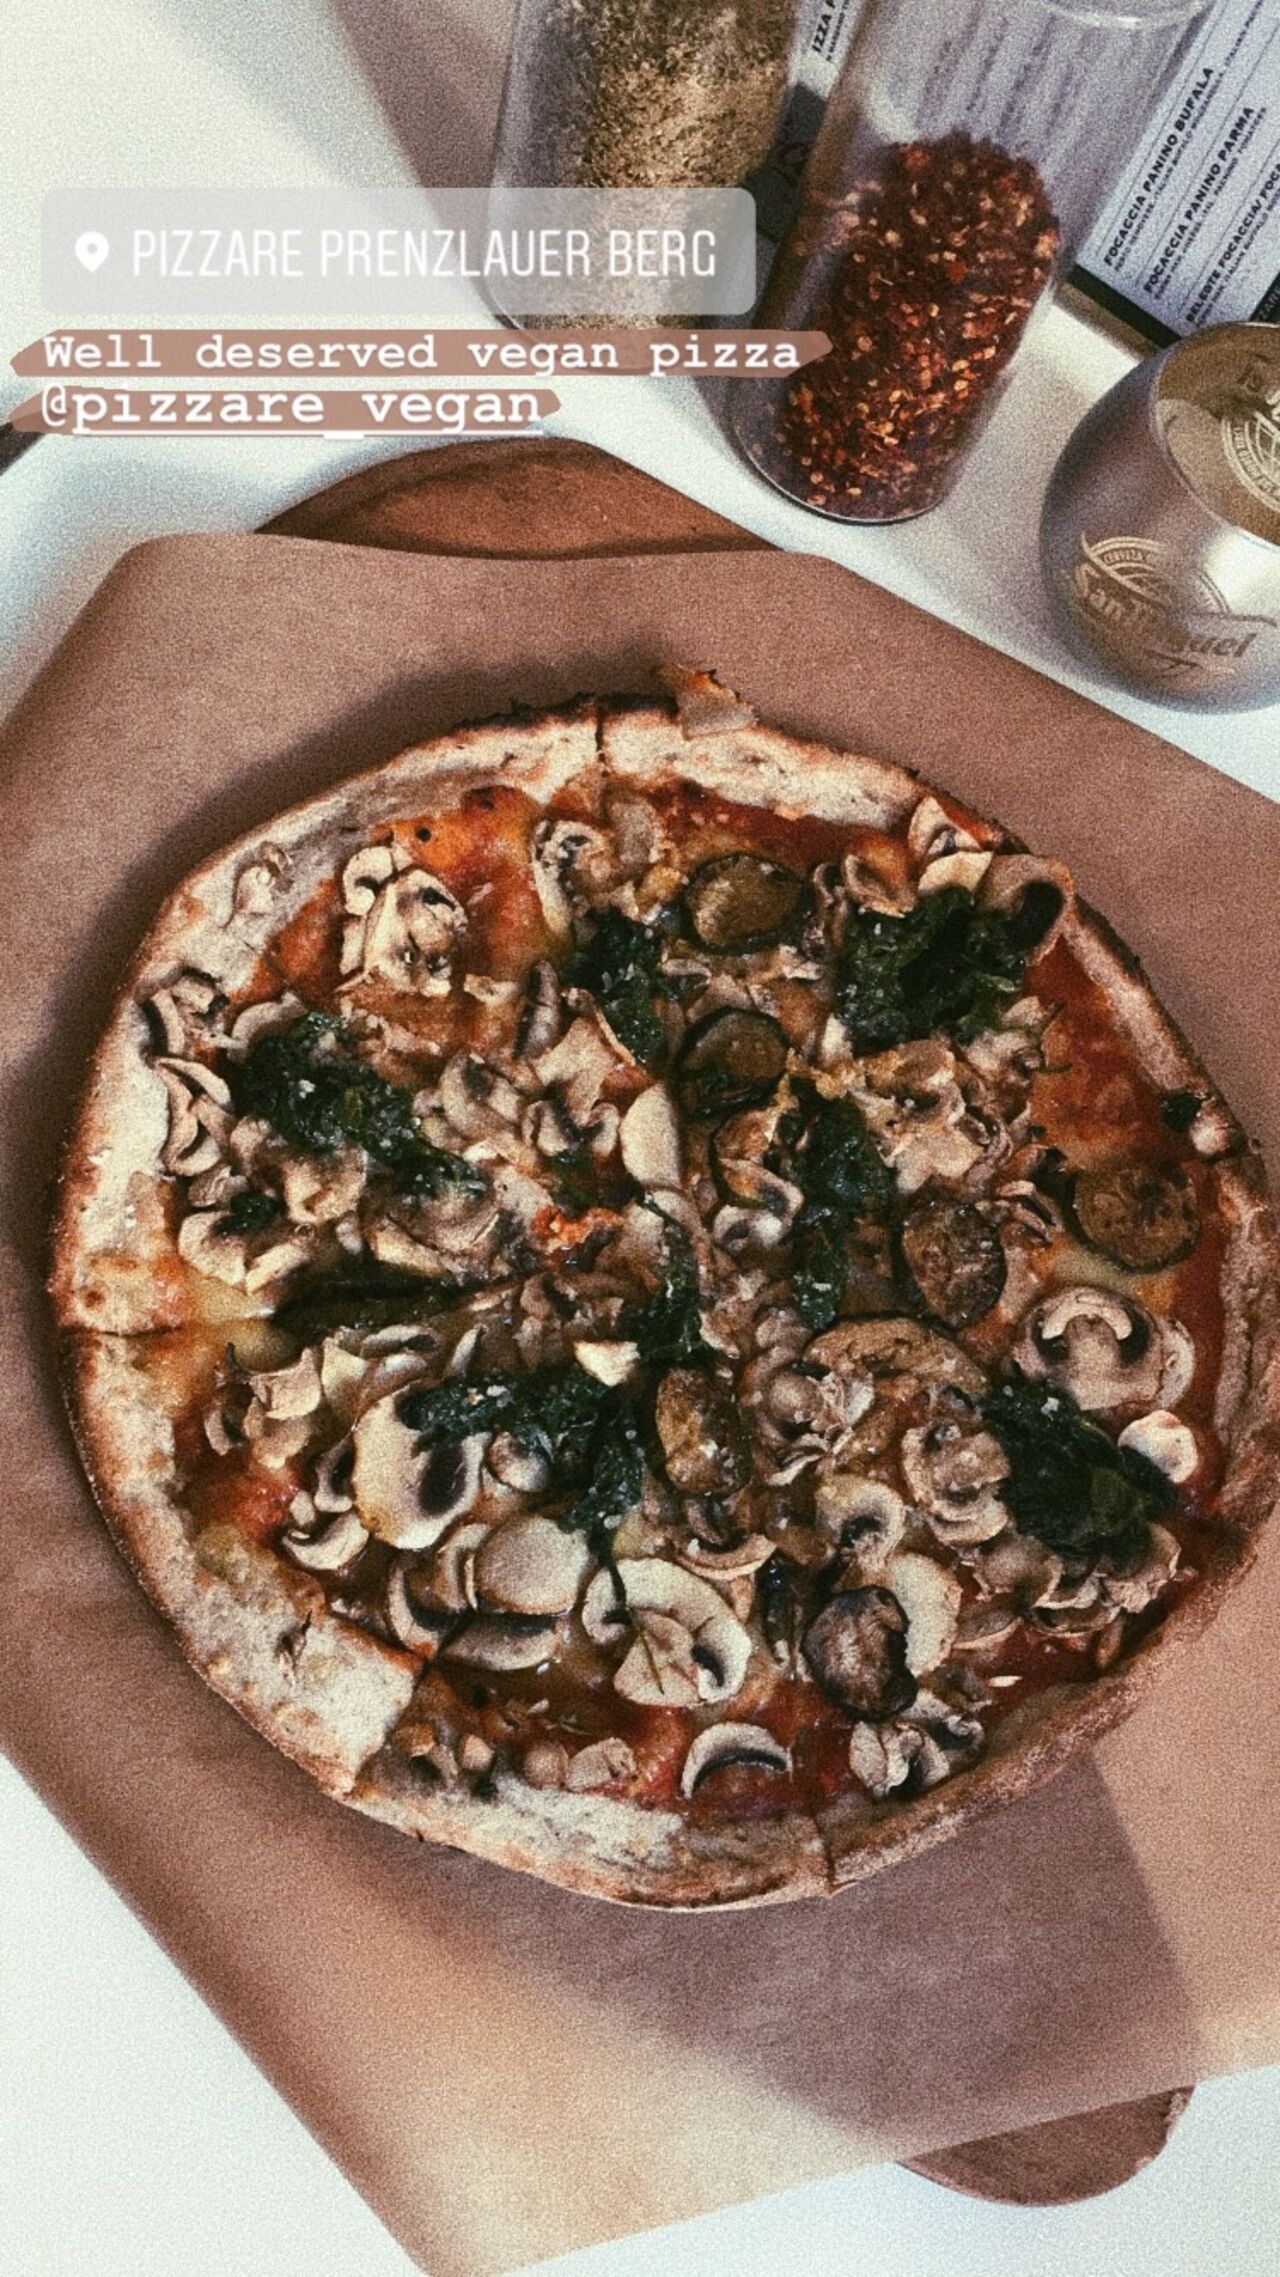 A photo of Pizzare